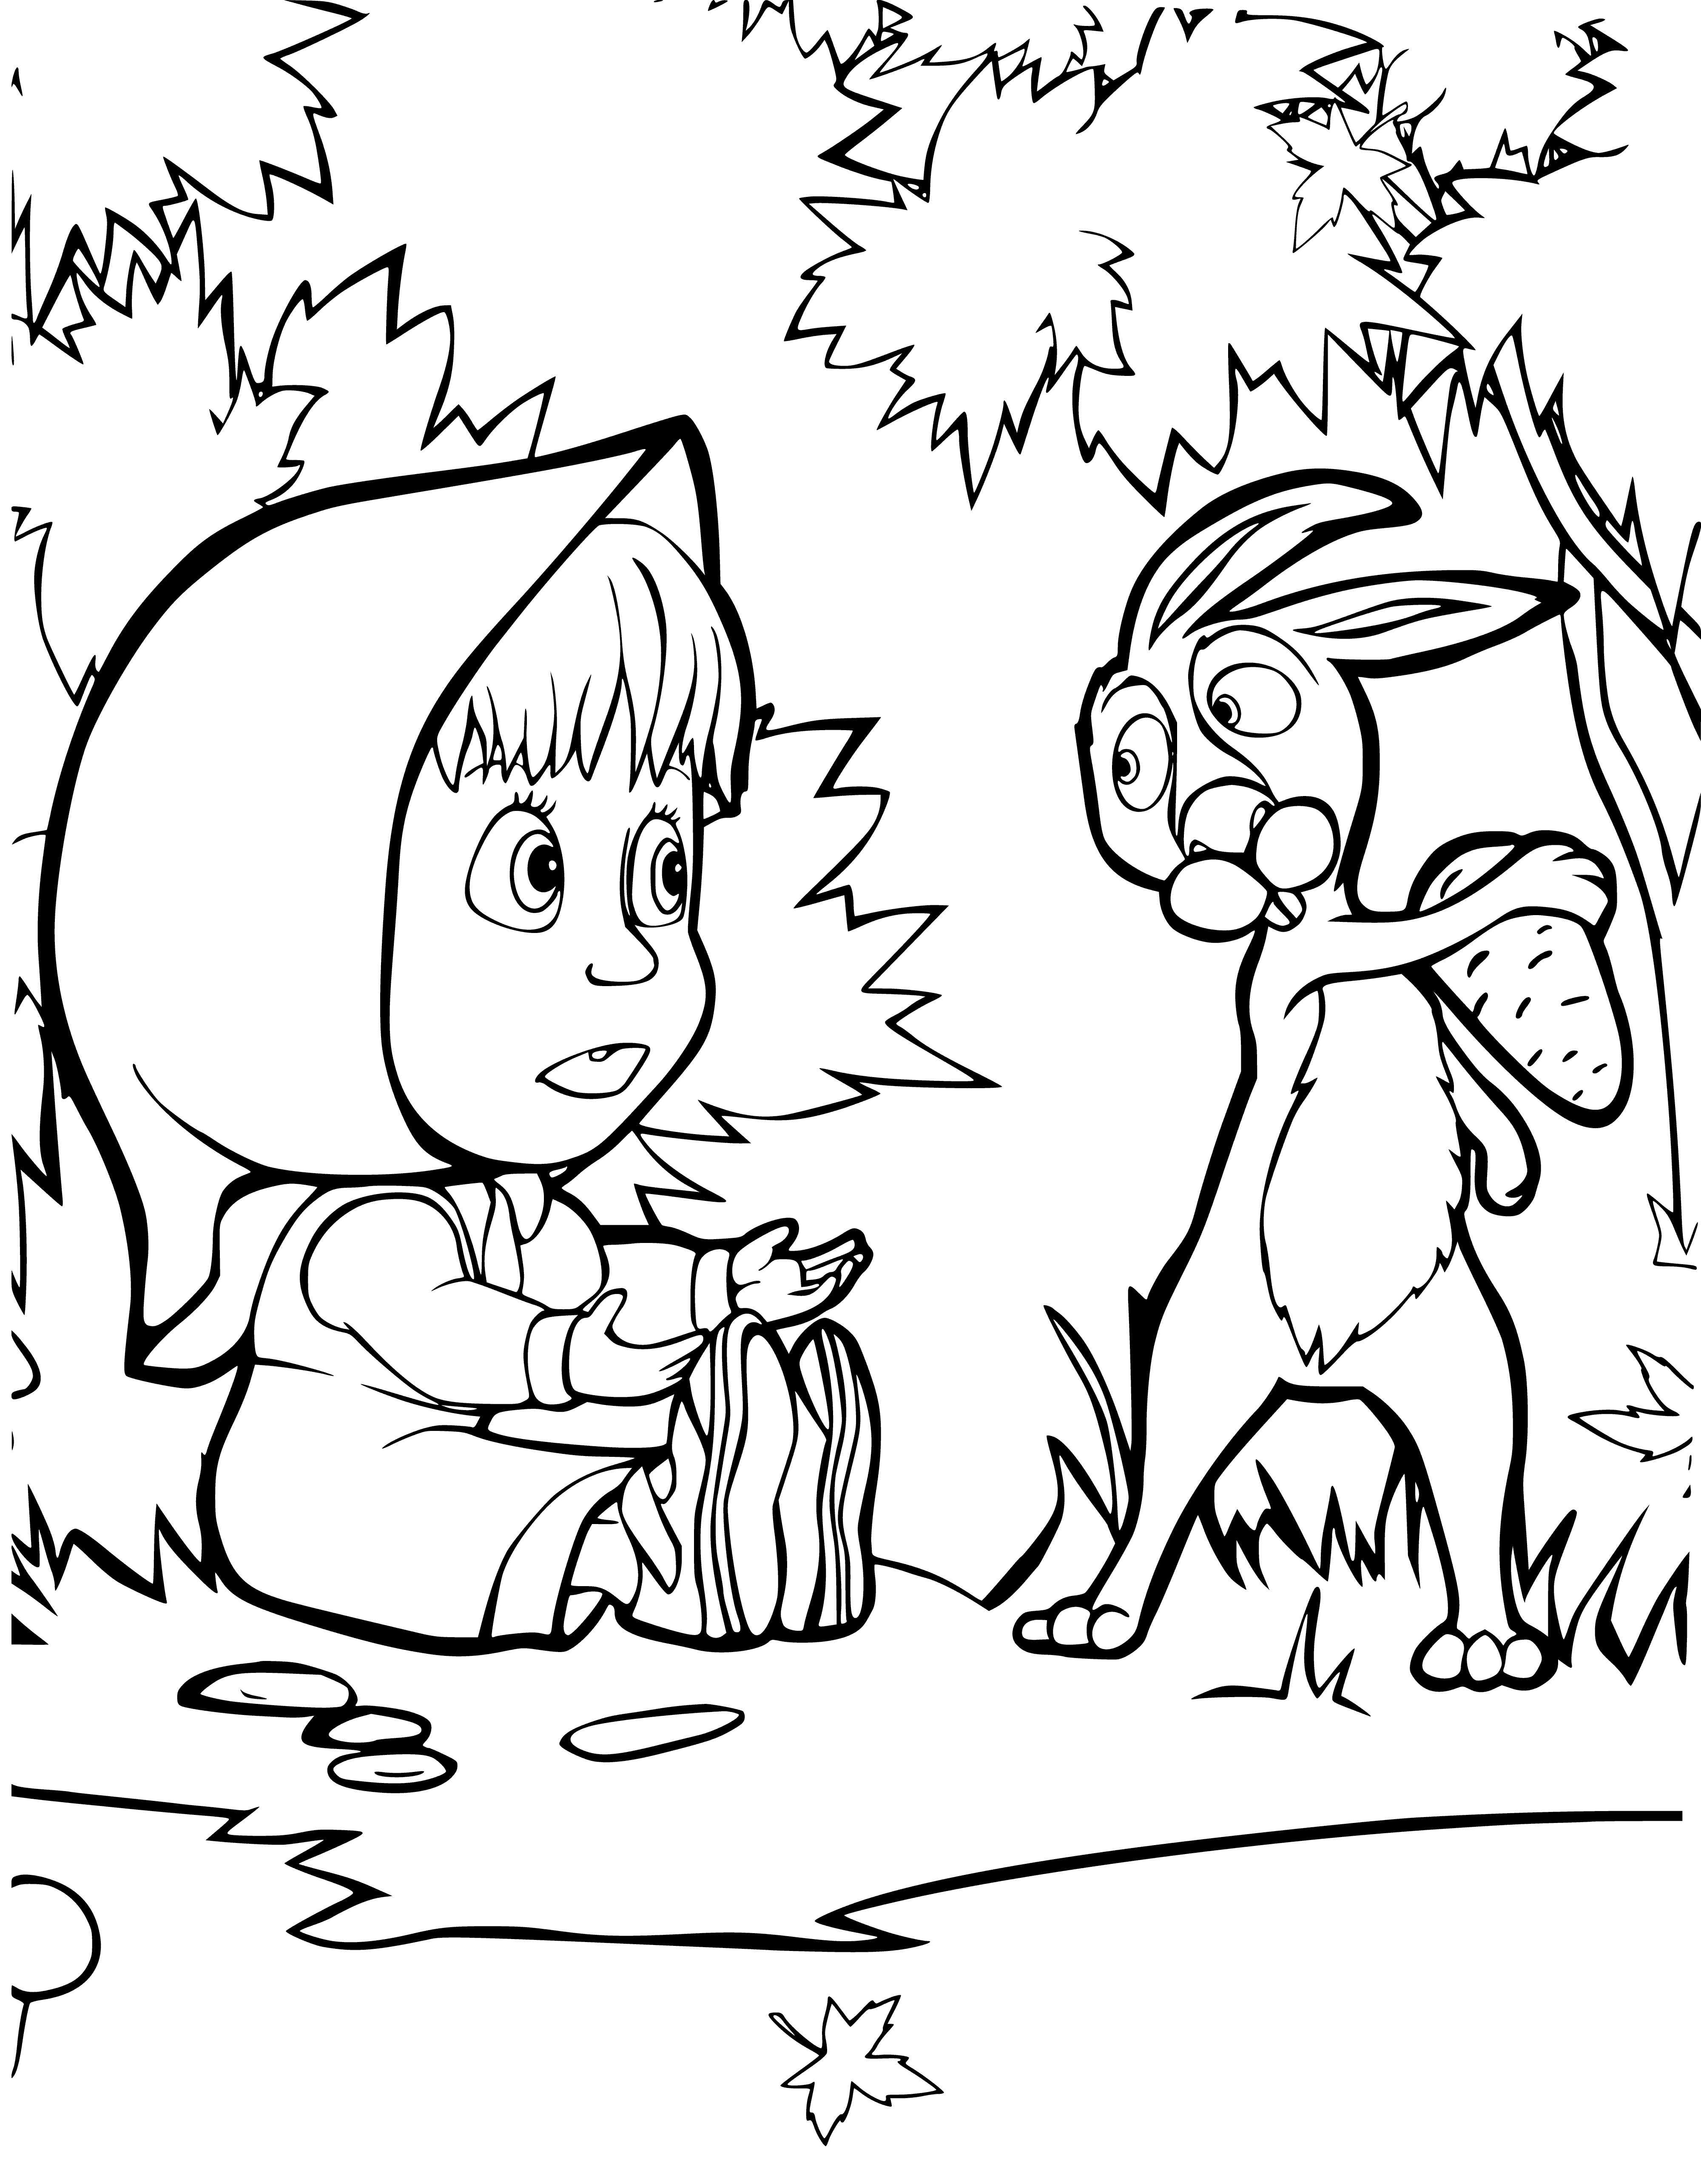 coloring page: Masha and Bear are in a field with Bunny eating a carrot Masha's holding.